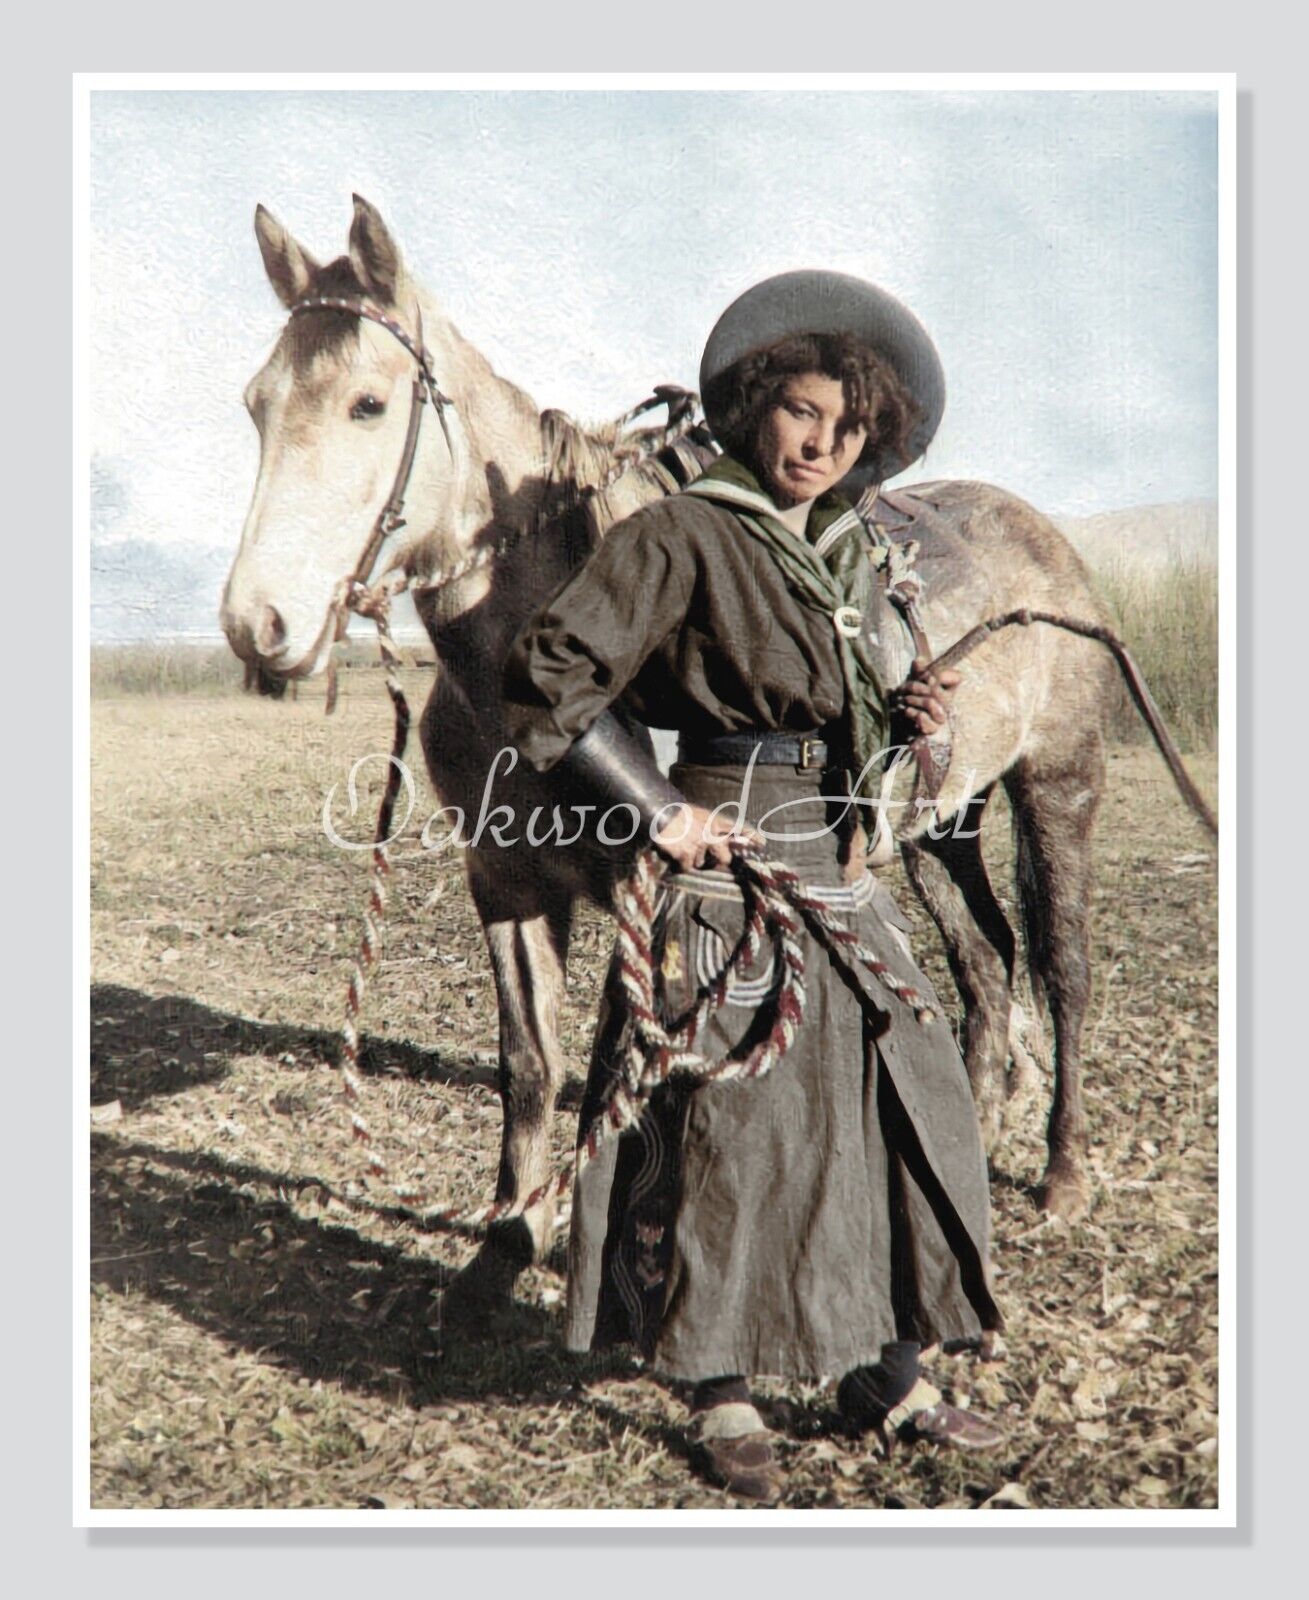 Cowgirl Nellie Brown, Black Woman & Horse, Vintage Colorized Photo Reprint